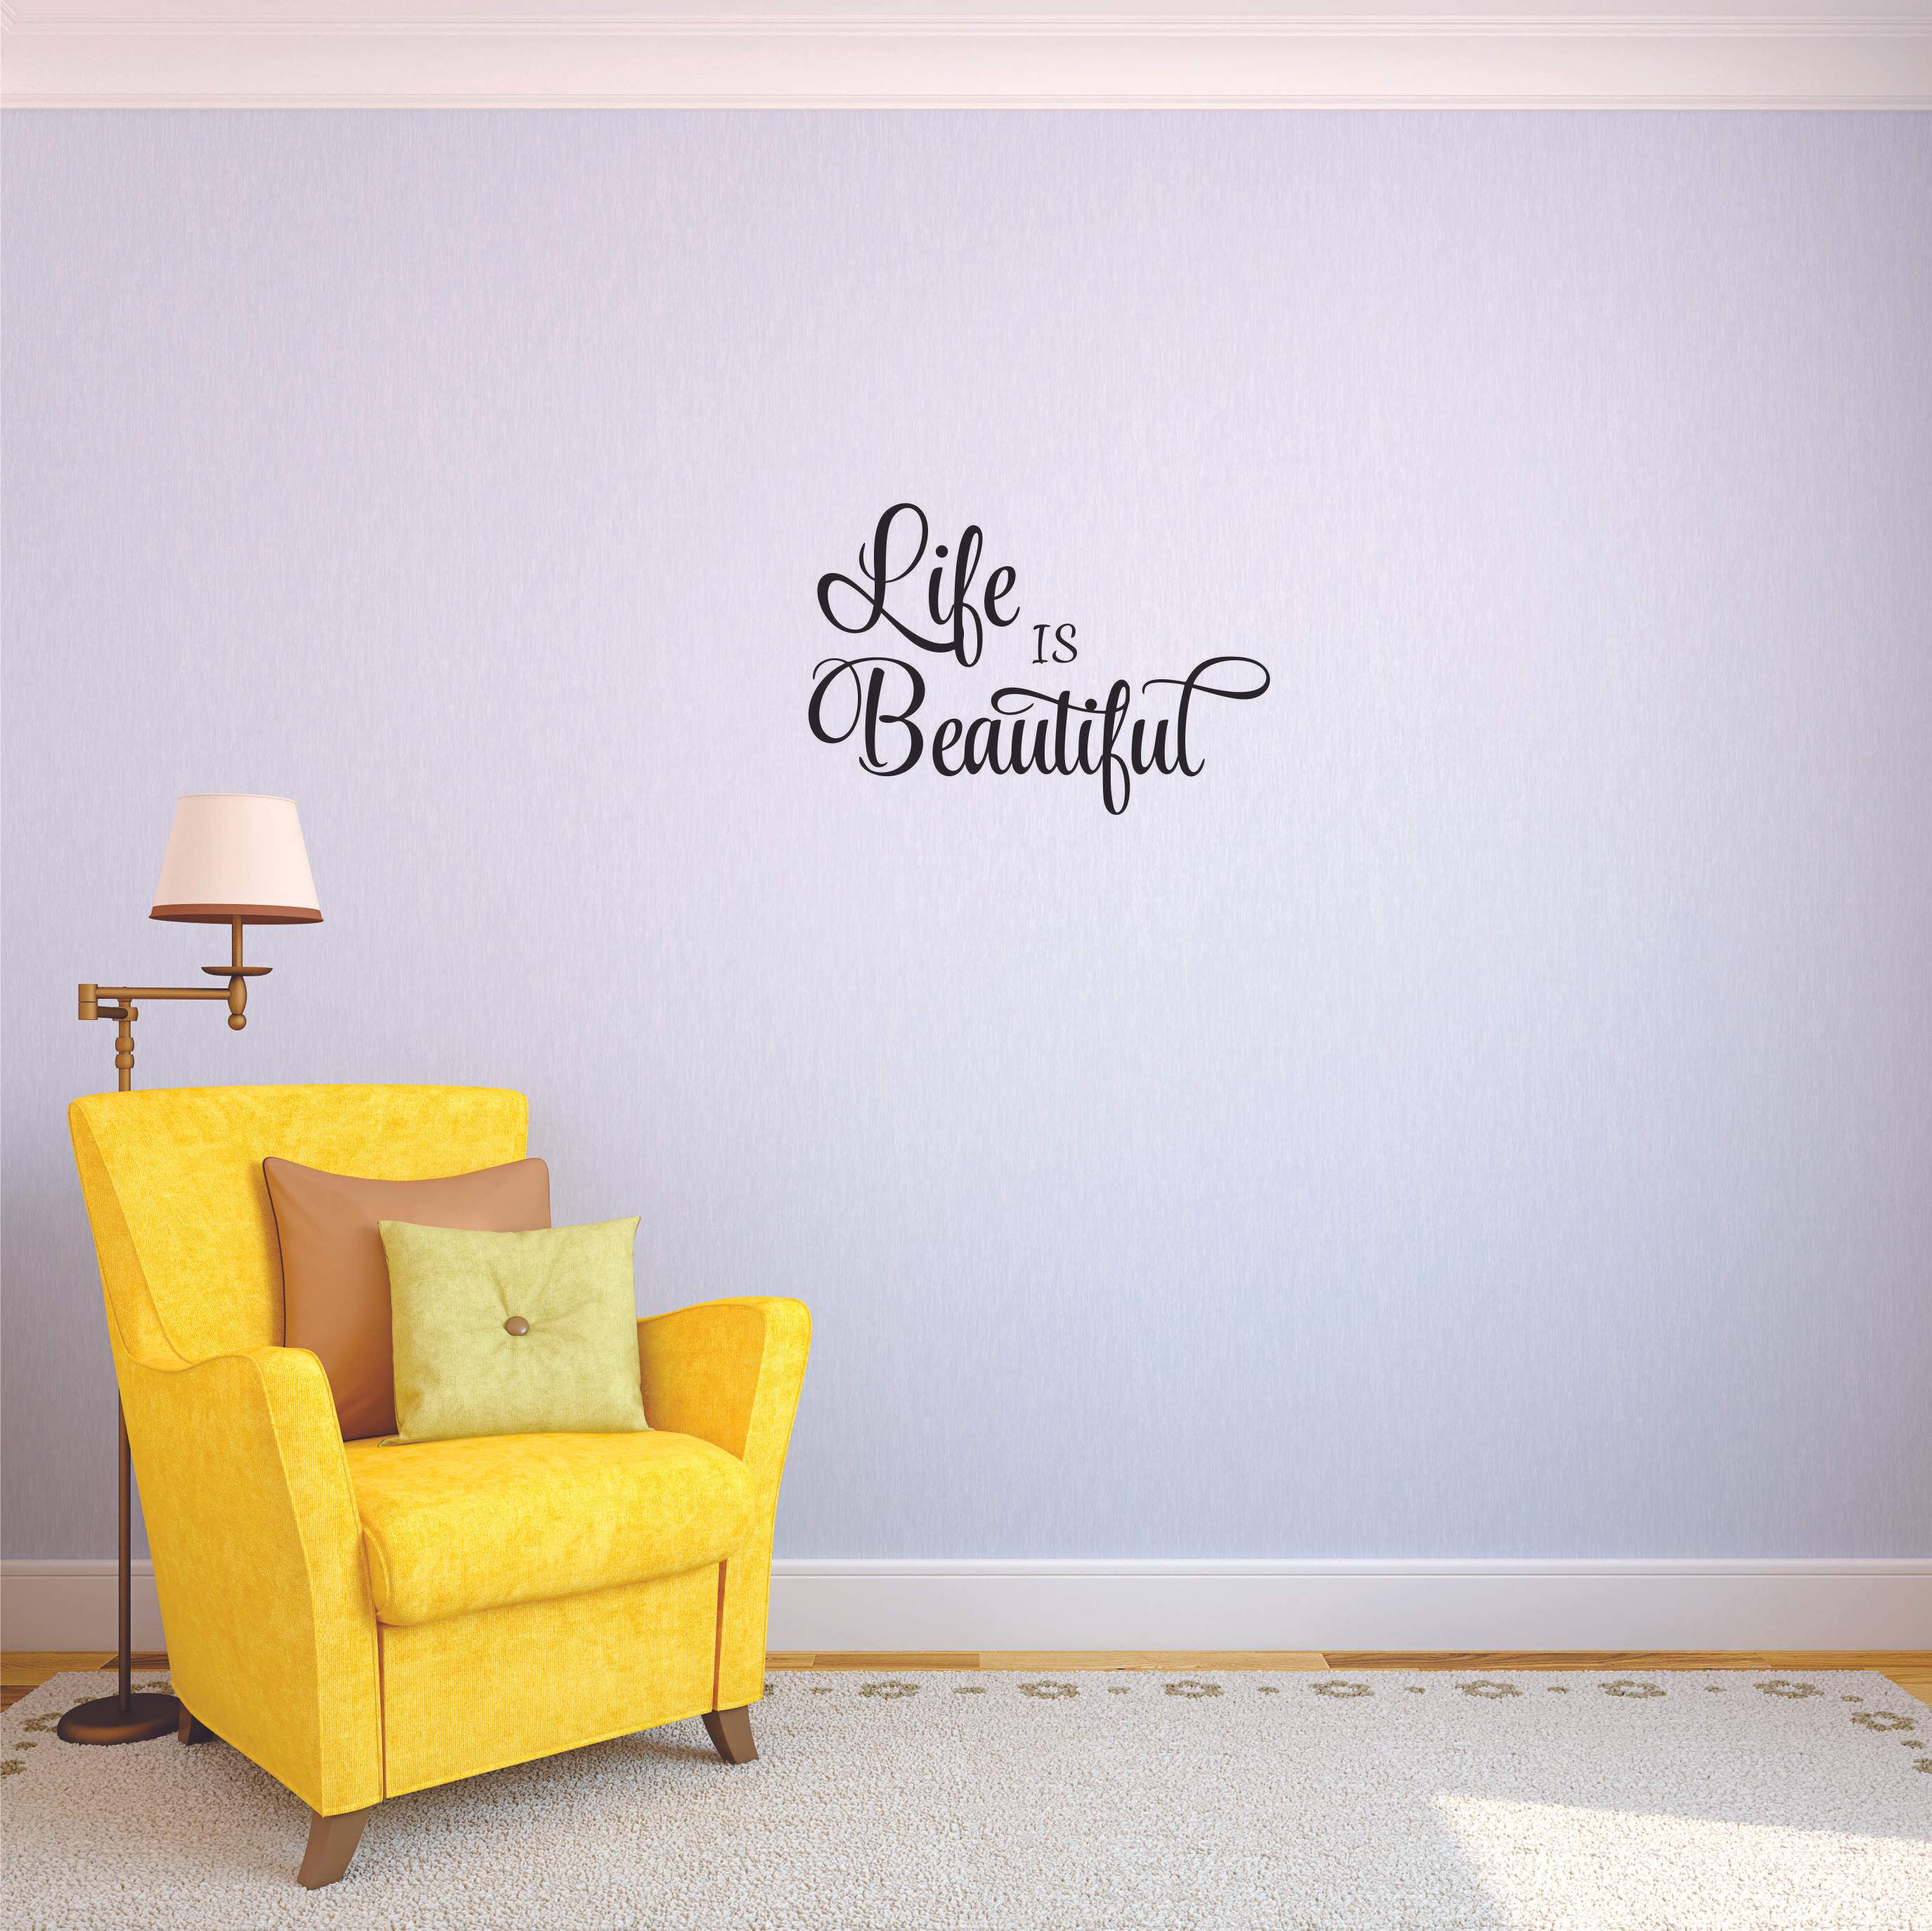 Cool Wall Quotes Decal Life Is Beautiful DIY Removable